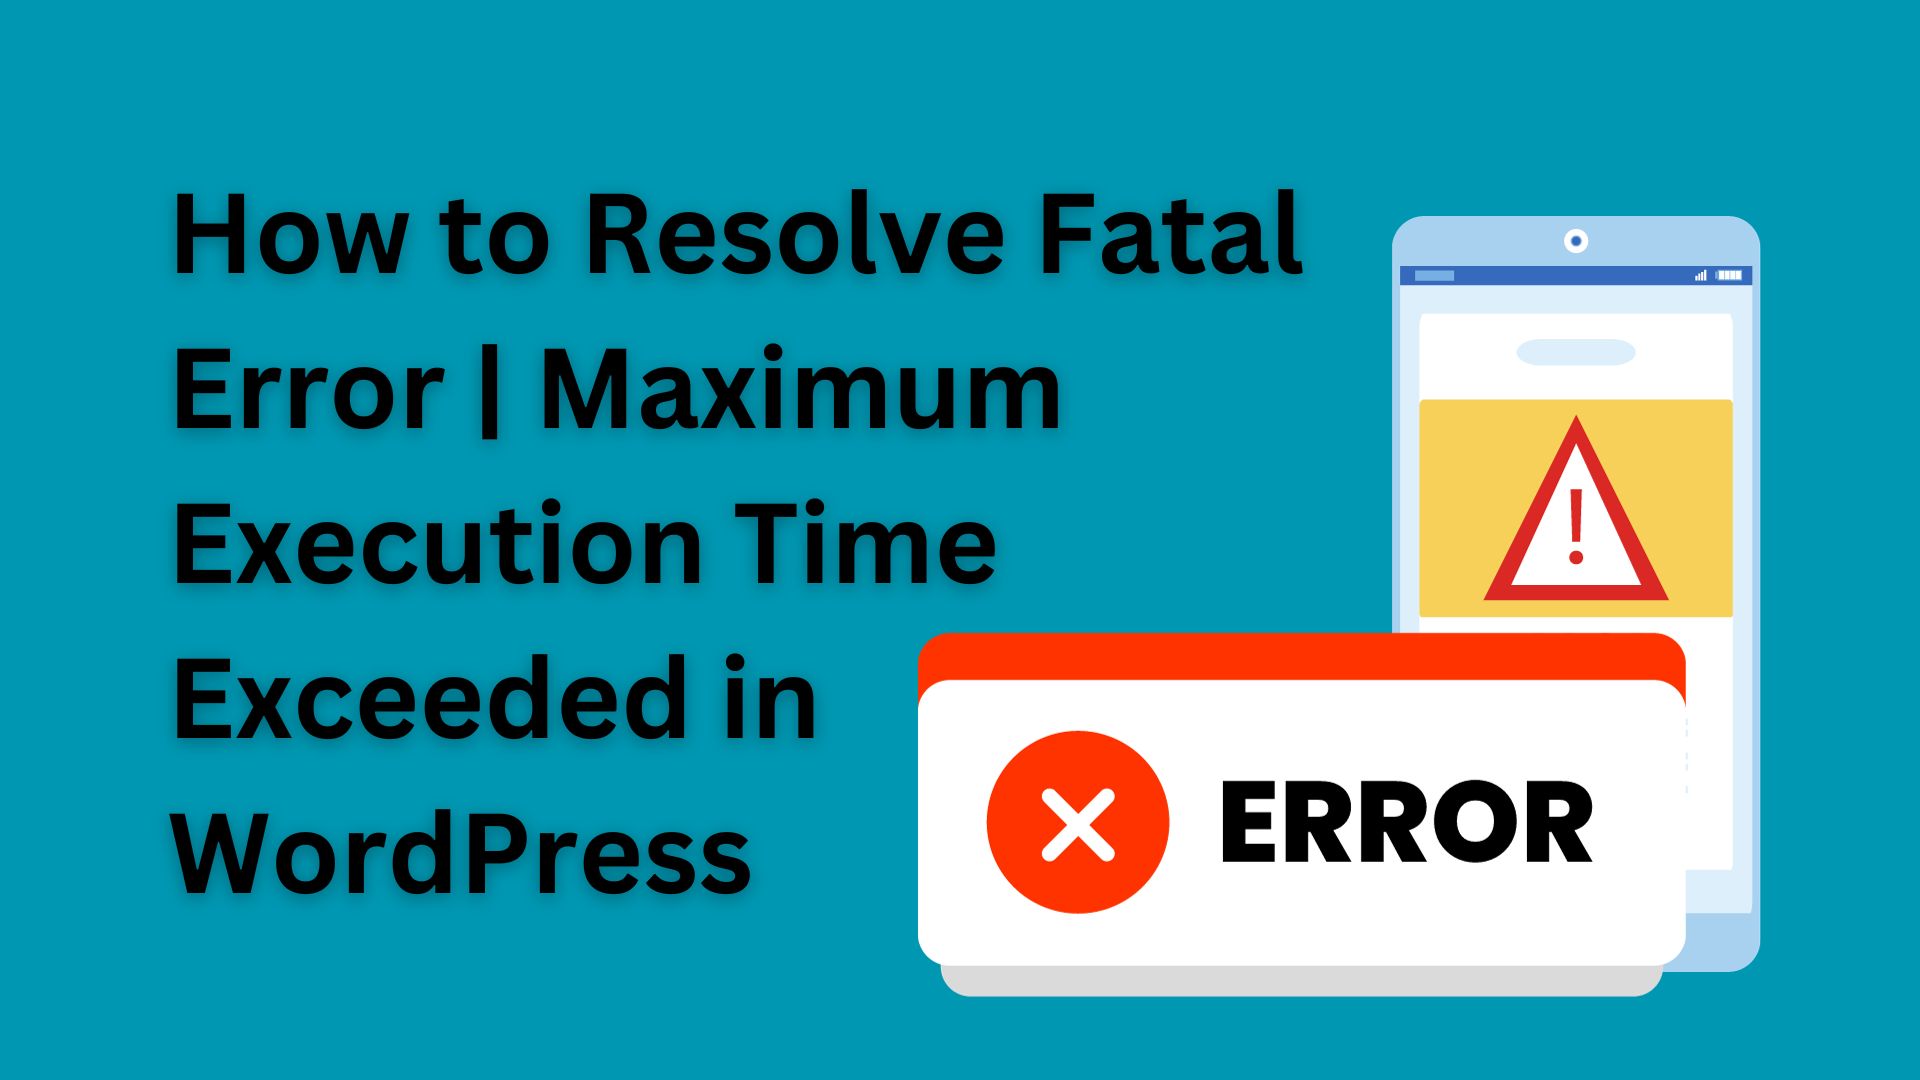 How to Resolve Fatal Error Maximum Execution Time Exceeded in WordPress